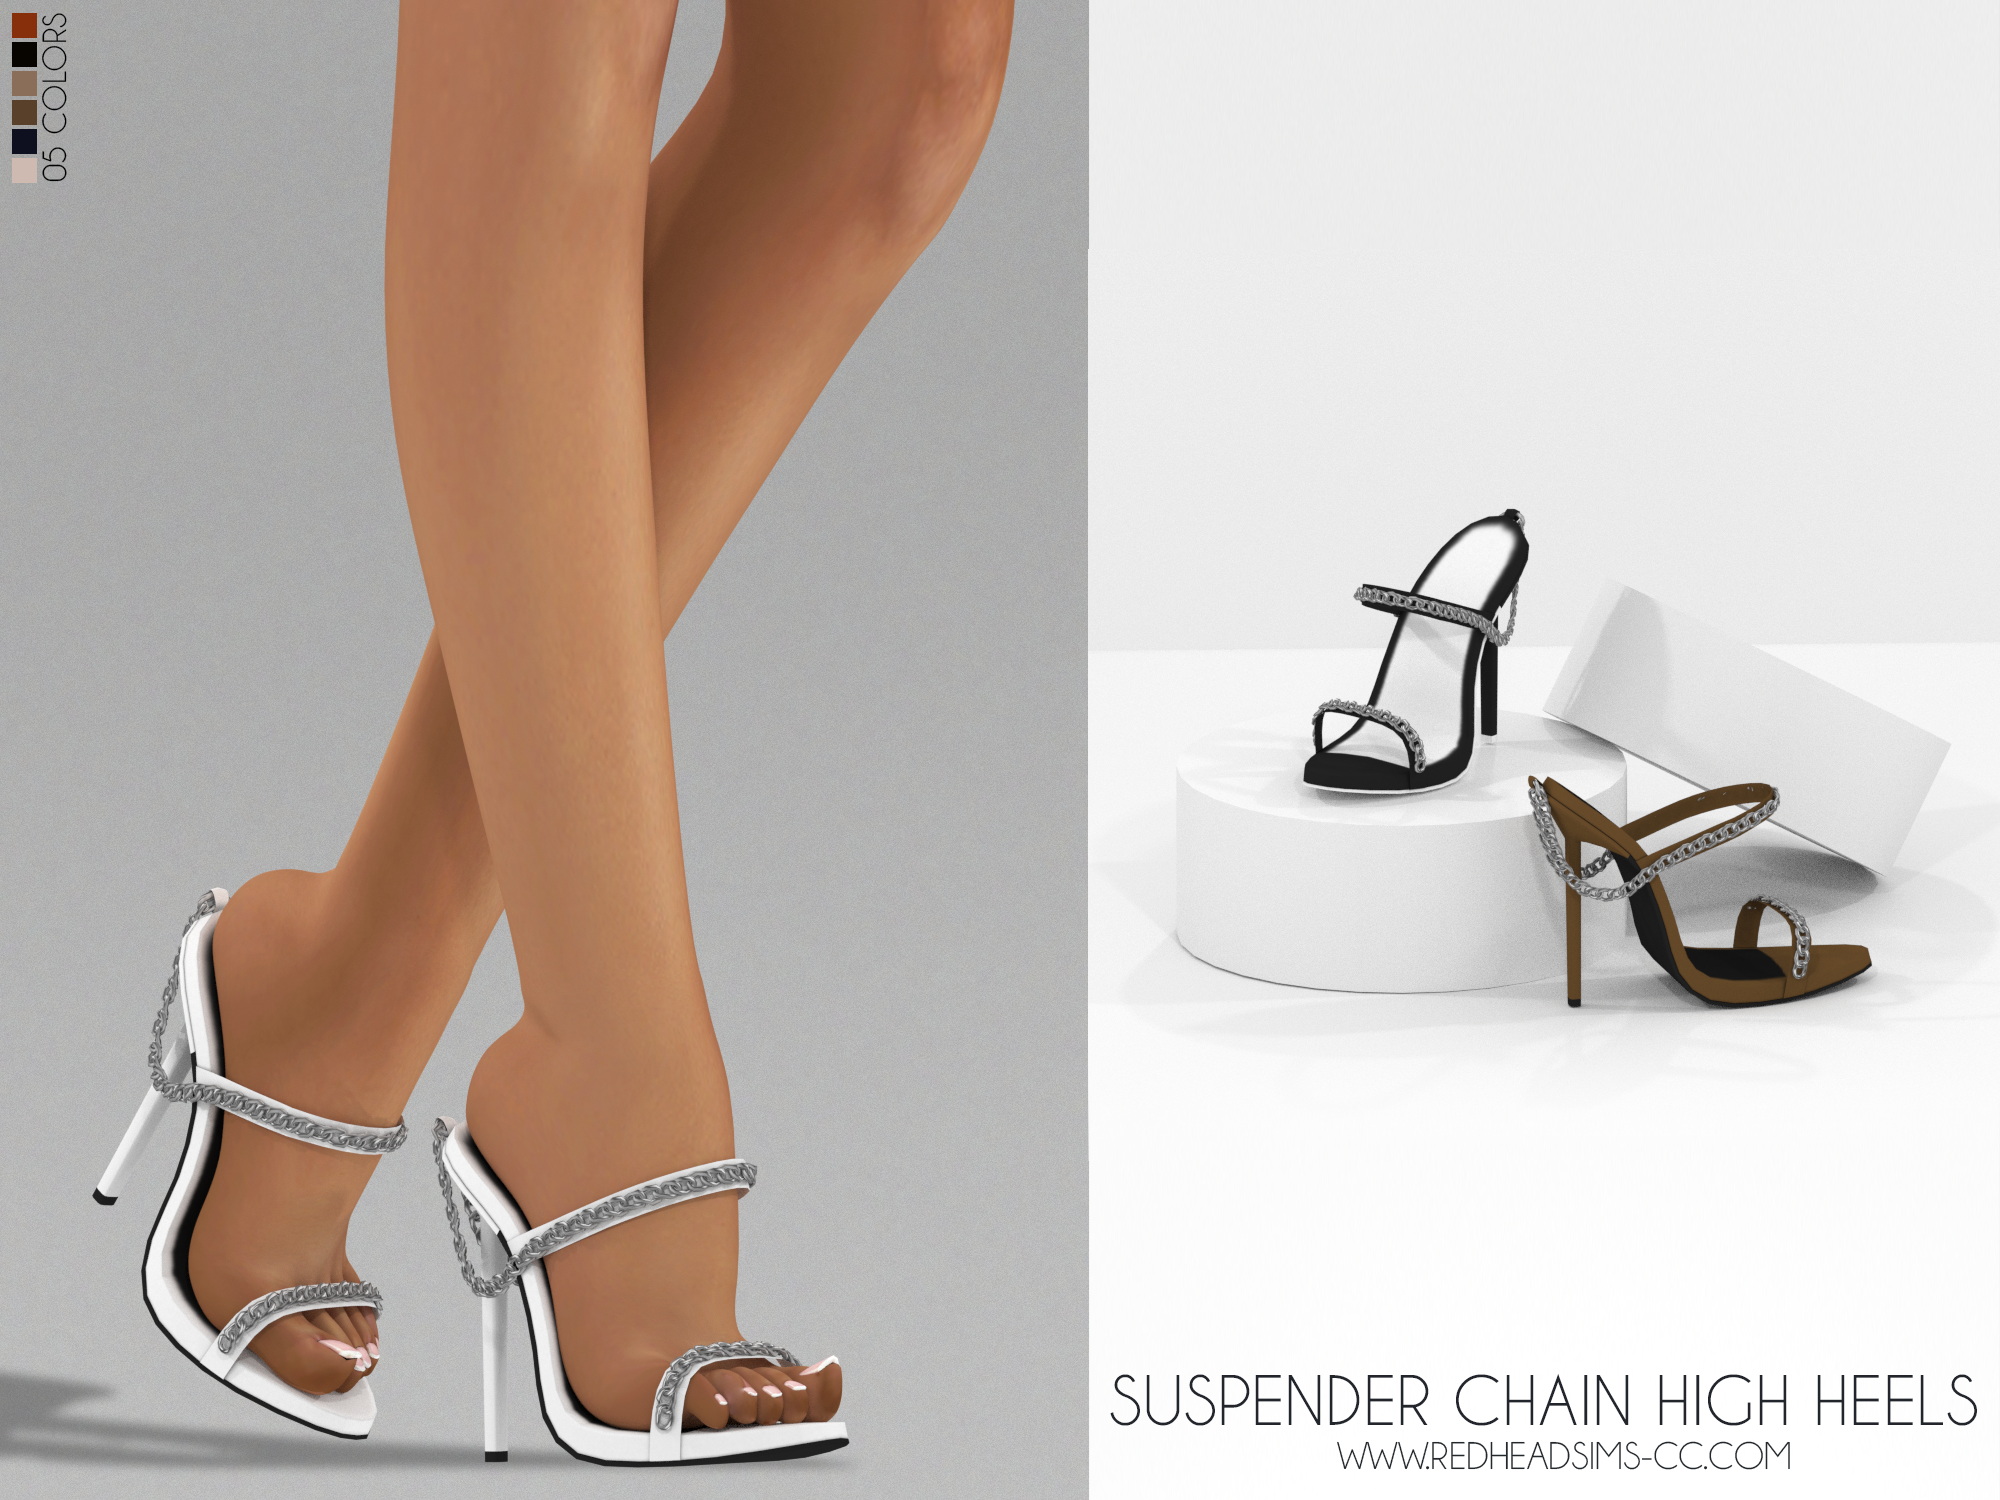 Suspender Chain High Heels from Red Head Sims • Sims 4 Downloads